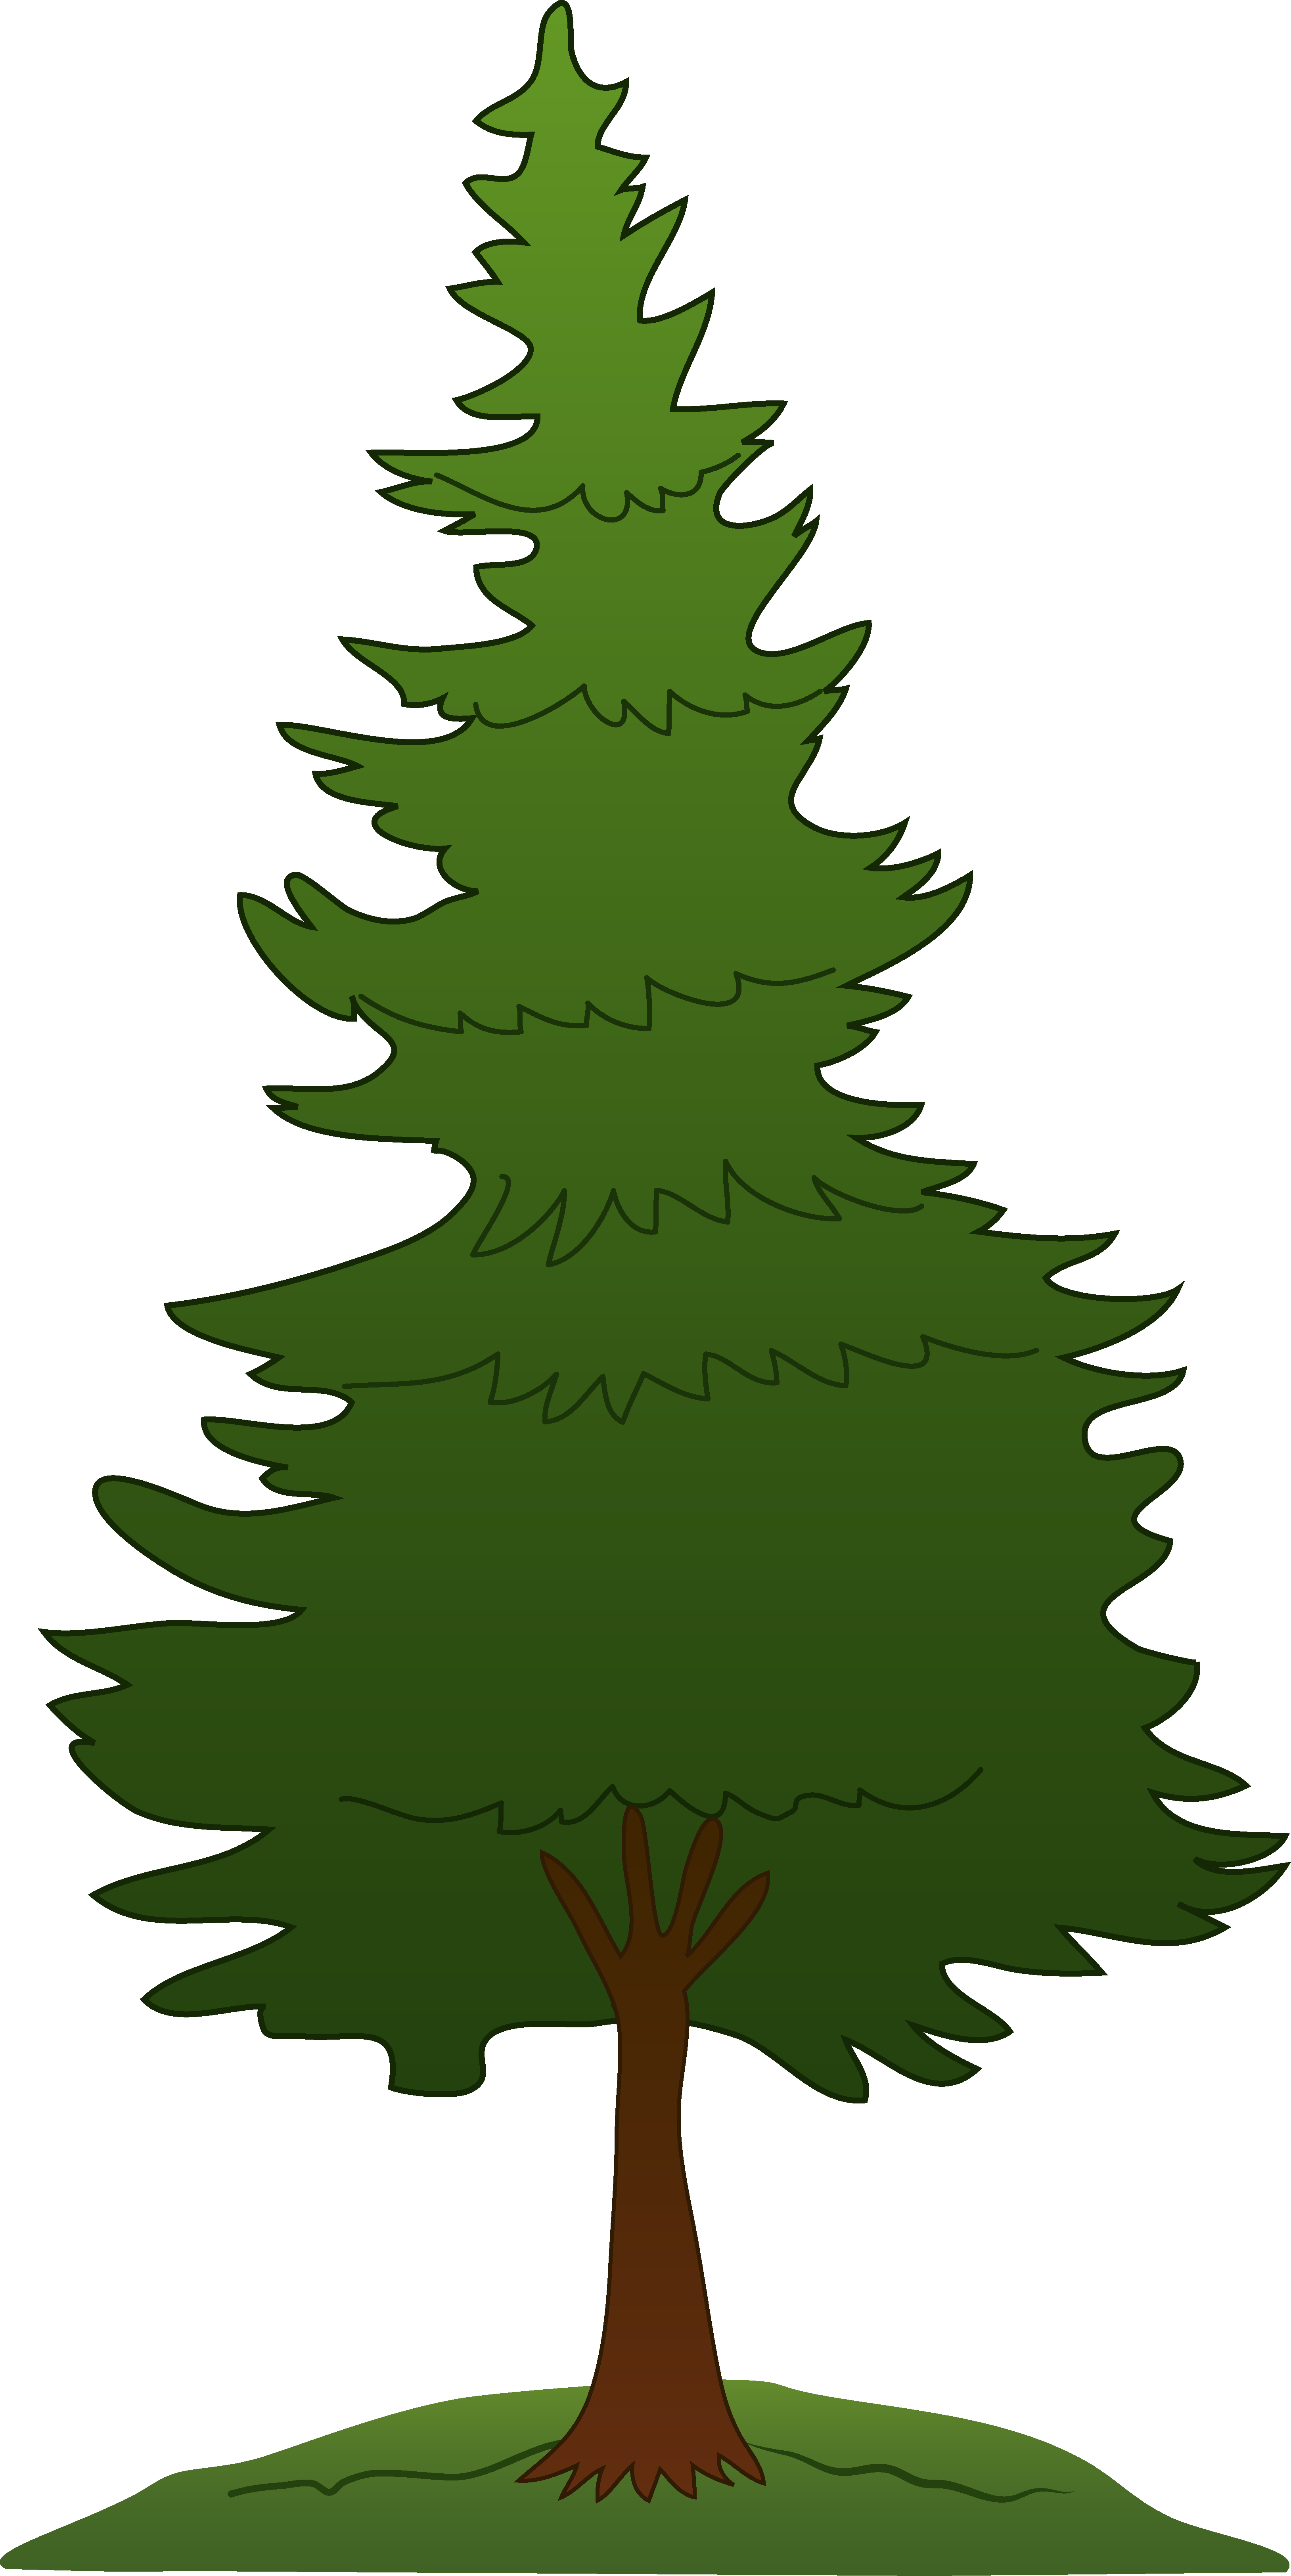 White pine silhouette at. Park clipart tree